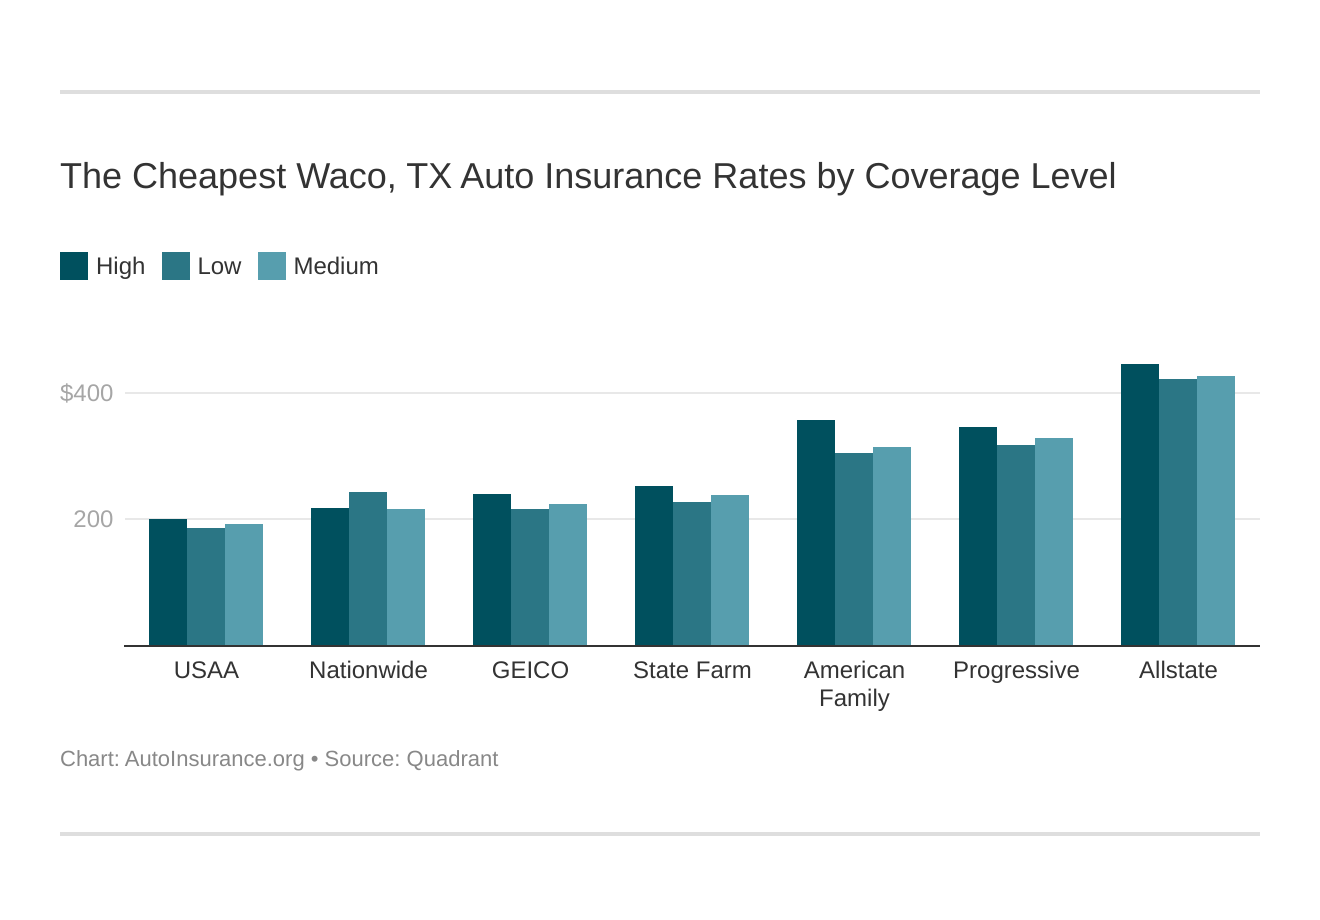 The Cheapest Waco, TX Auto Insurance Rates by Coverage Level